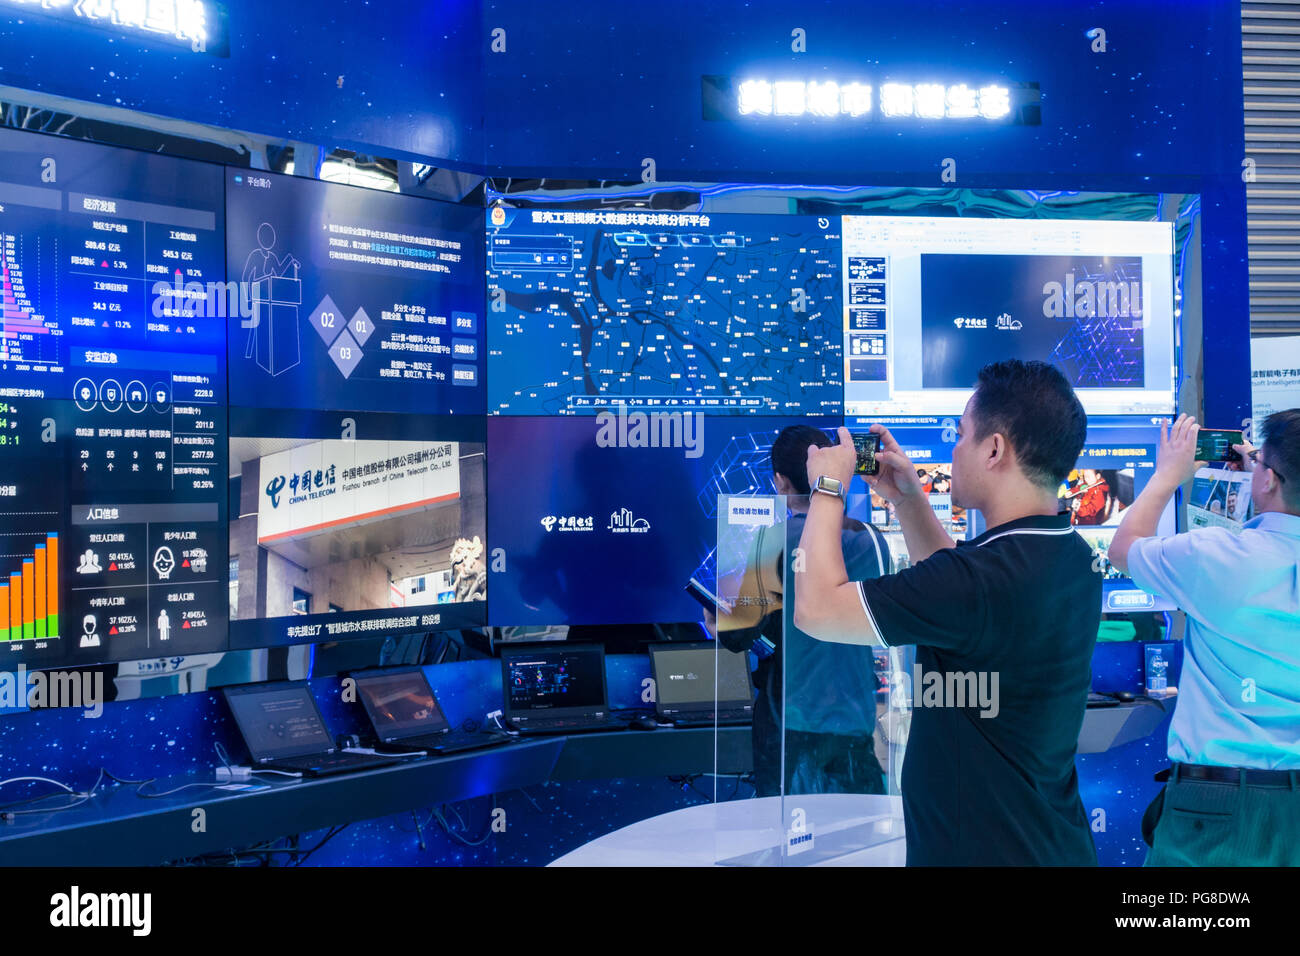 Smart city control room in Shenzhen, China Stock Photo